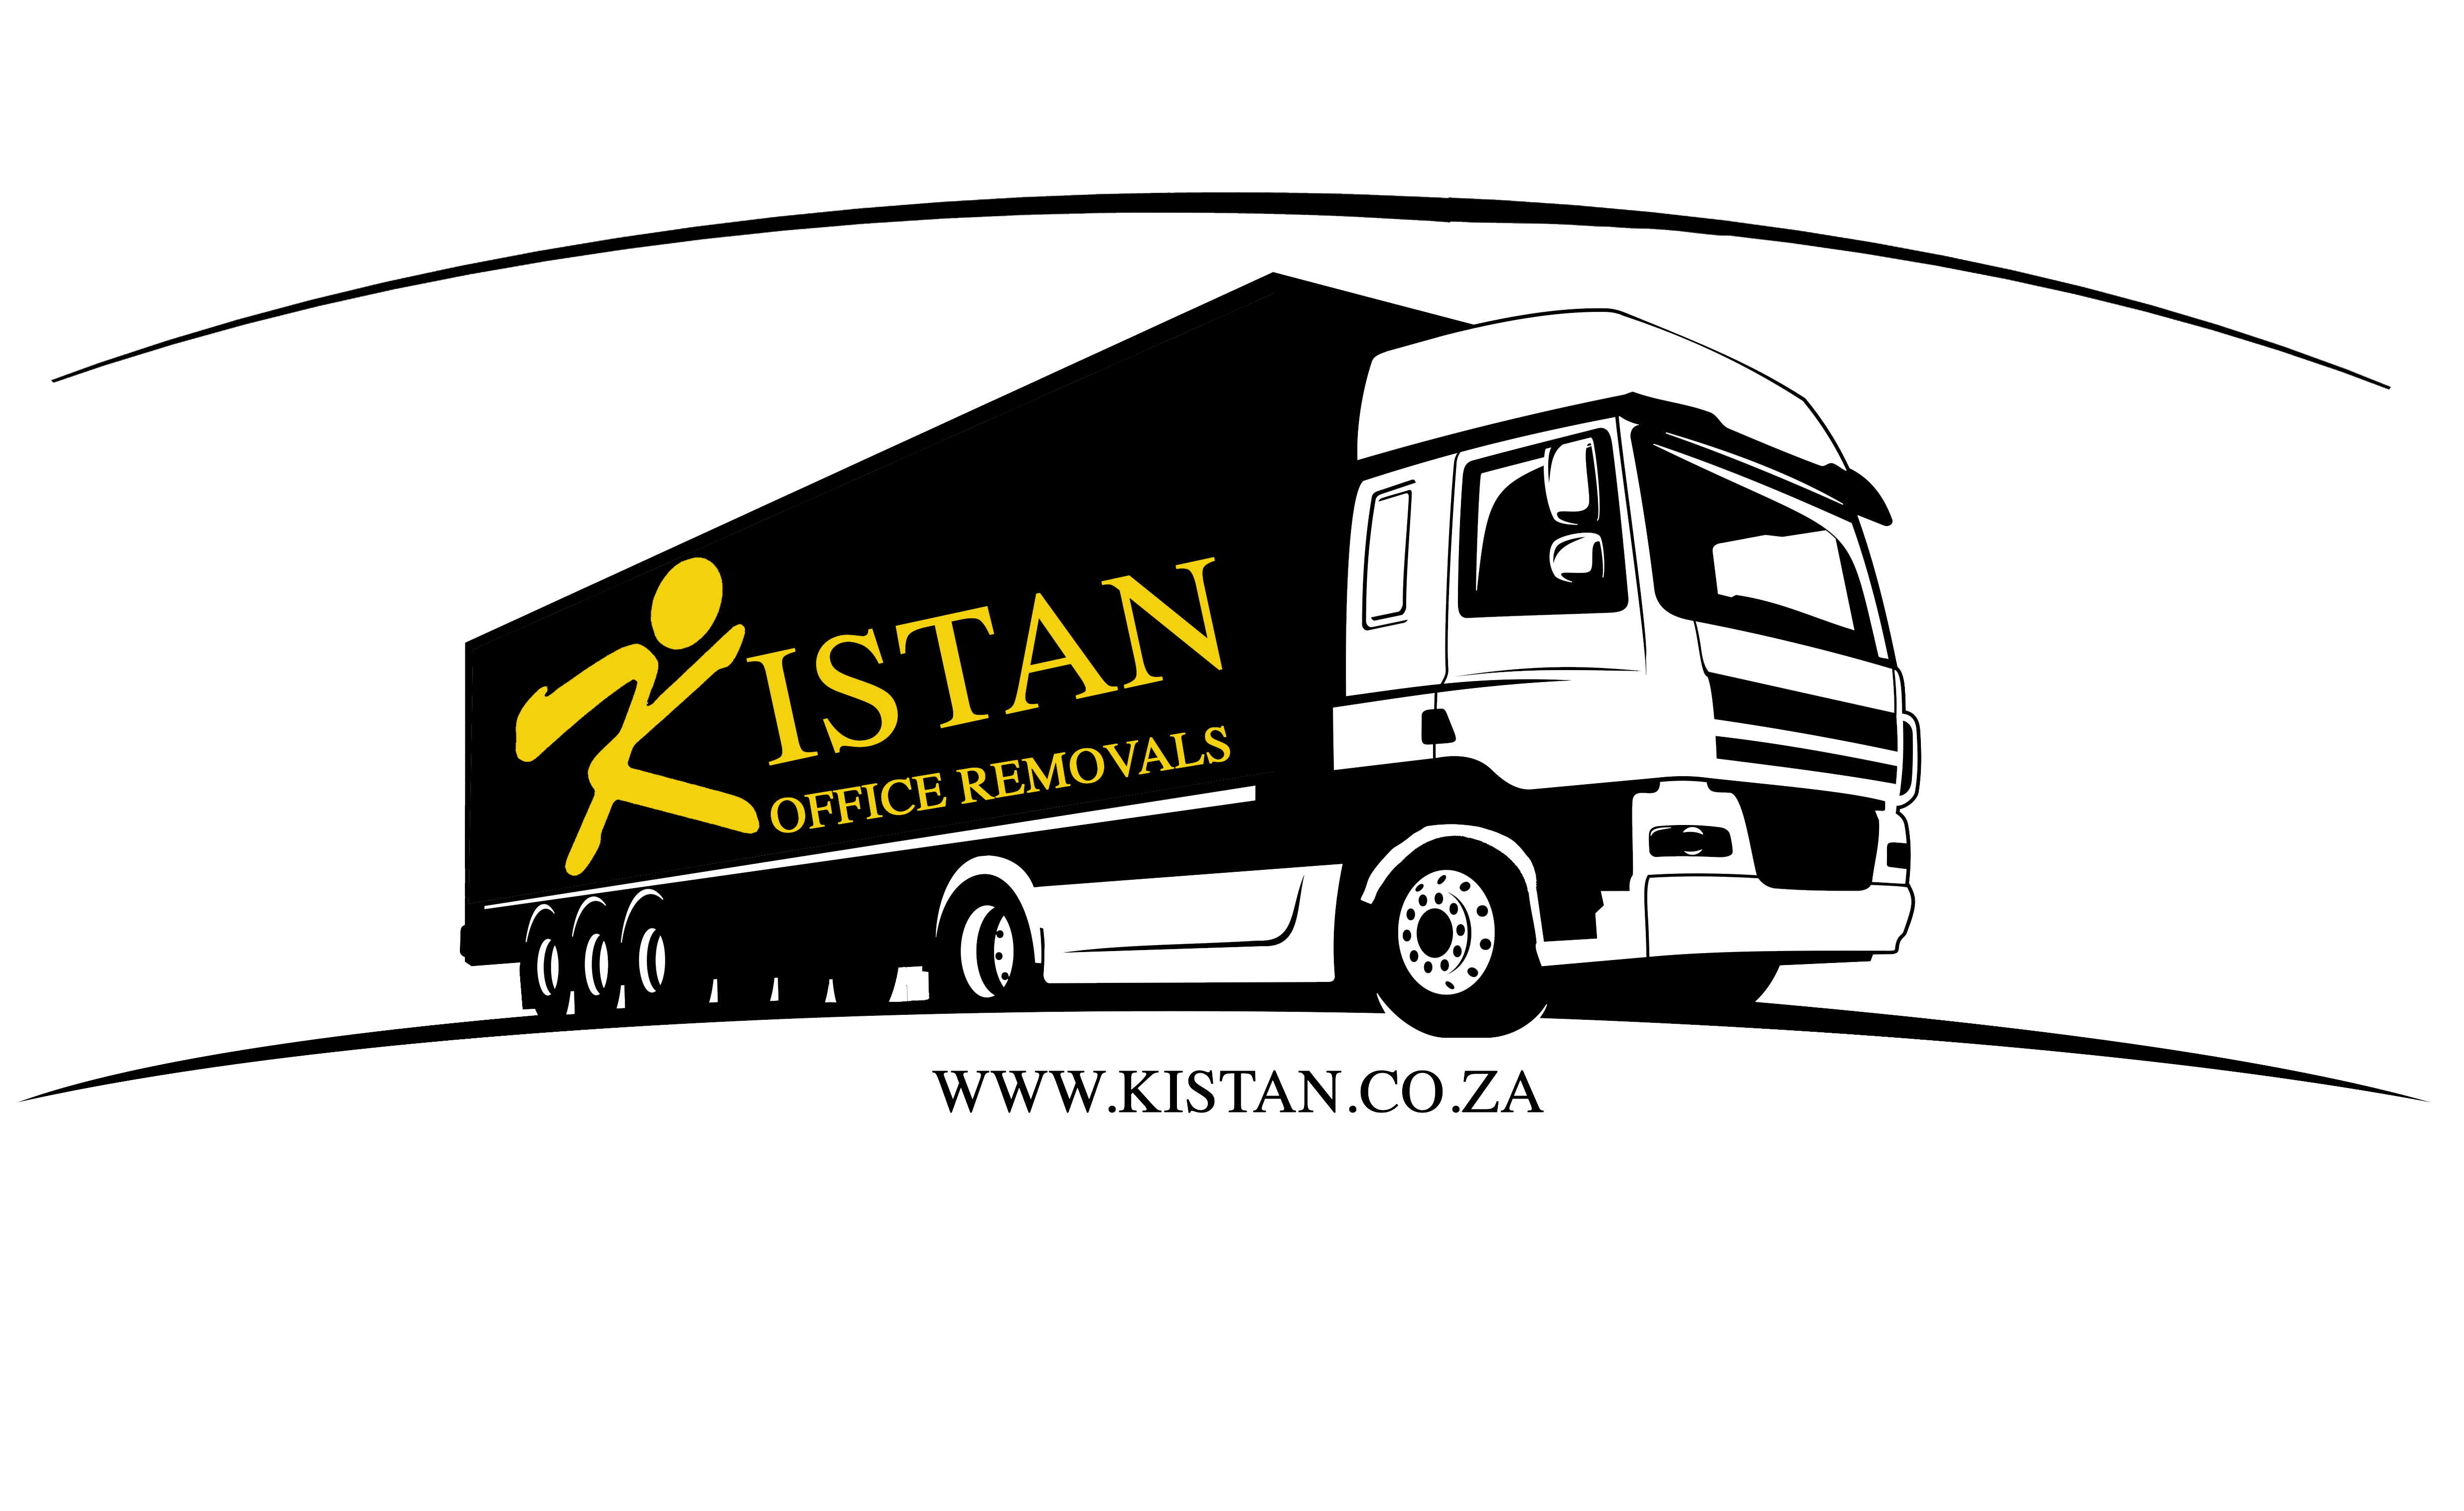 Kistan Office Removals